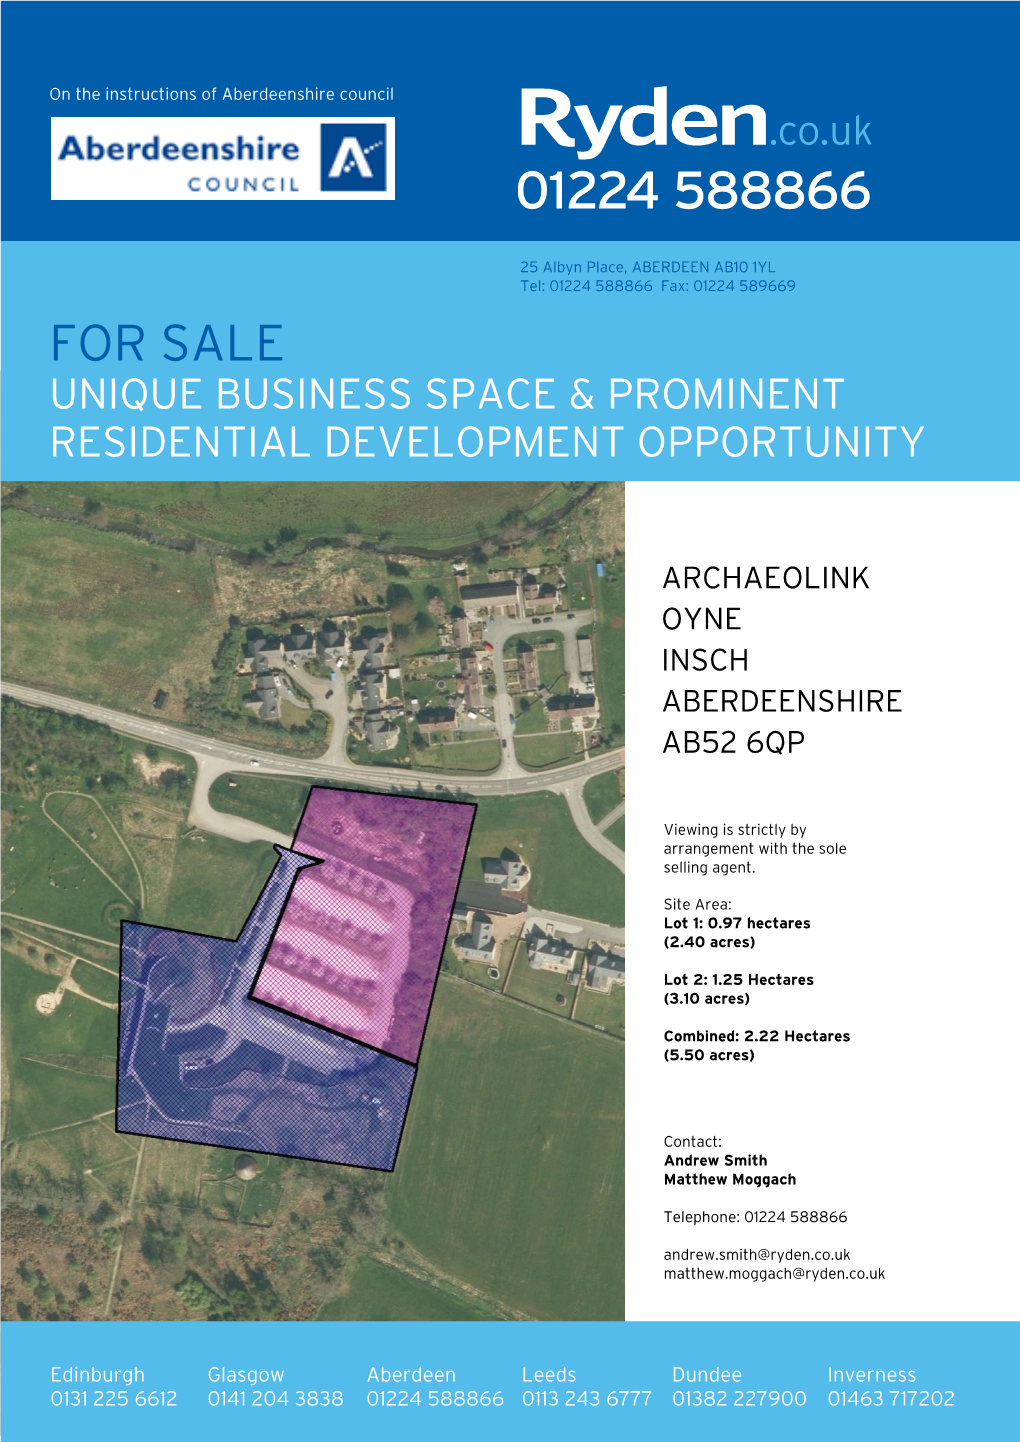 For Sale Unique Business Space & Prominent Residential Development Opportunity